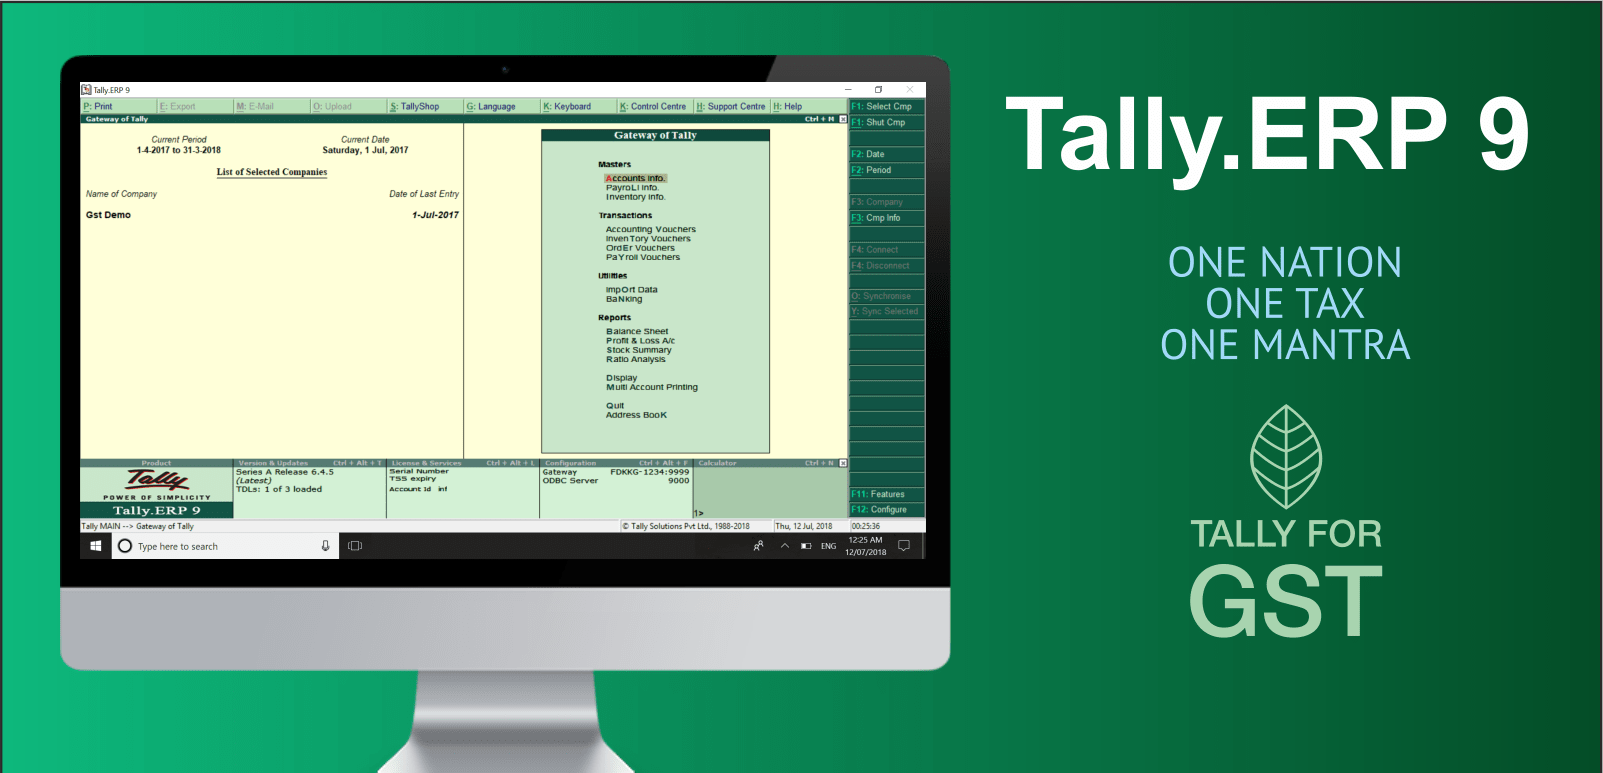 tally old version 7.2 free download